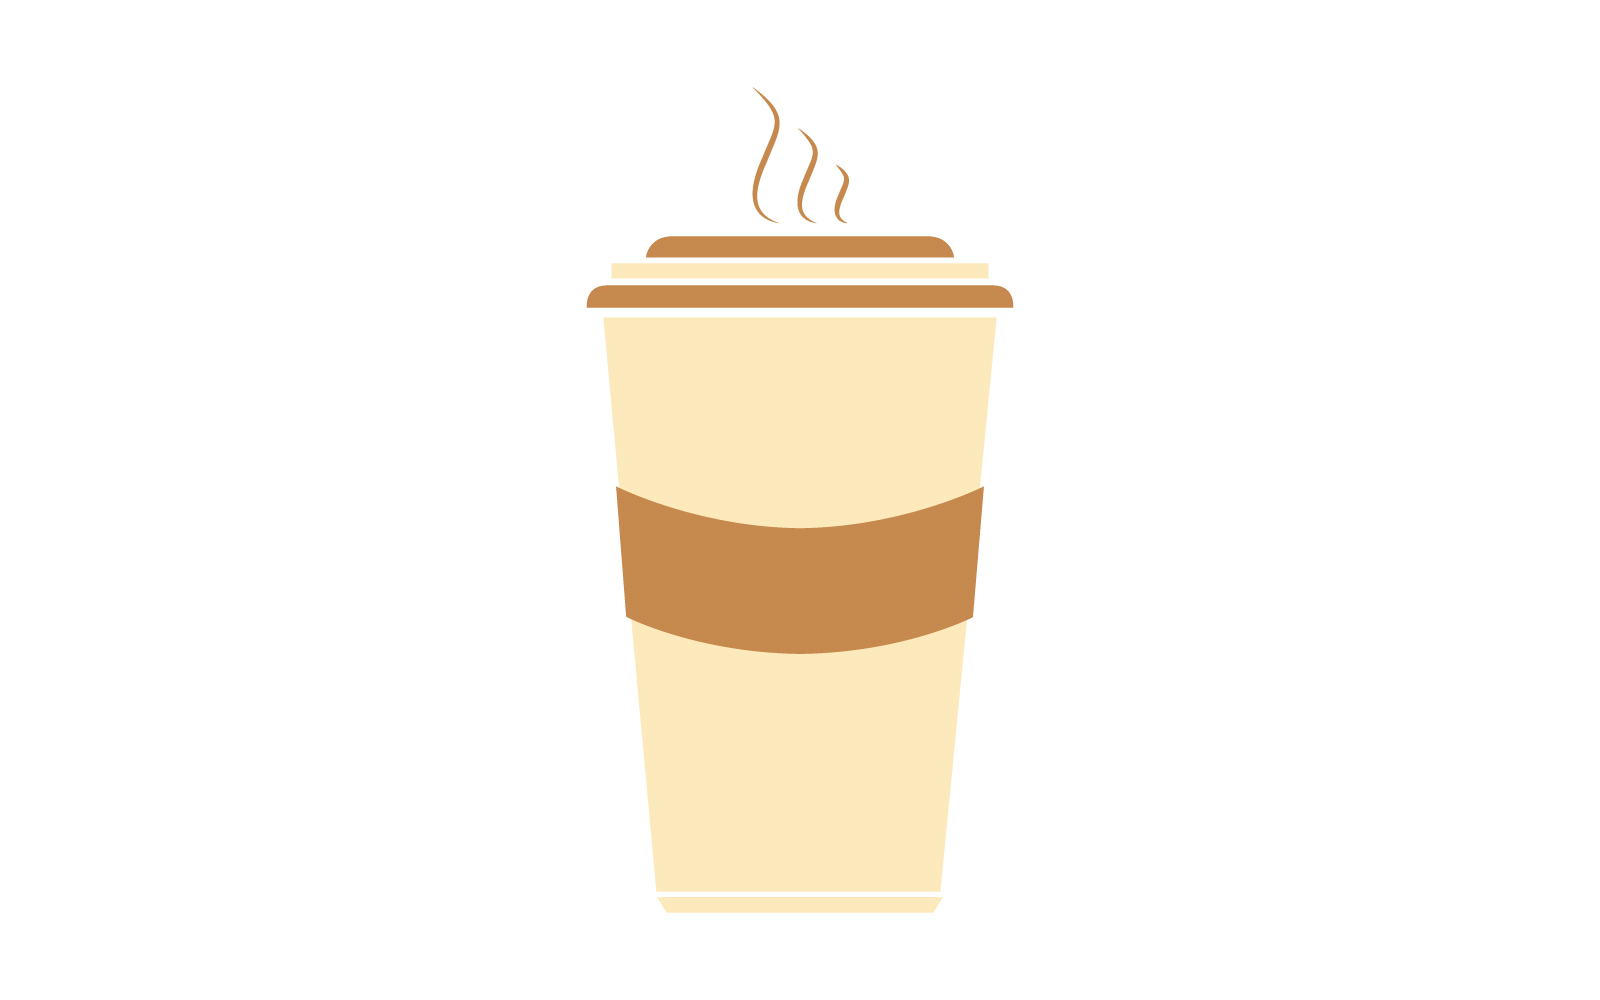 Coffee cup illustrated in vector on white background